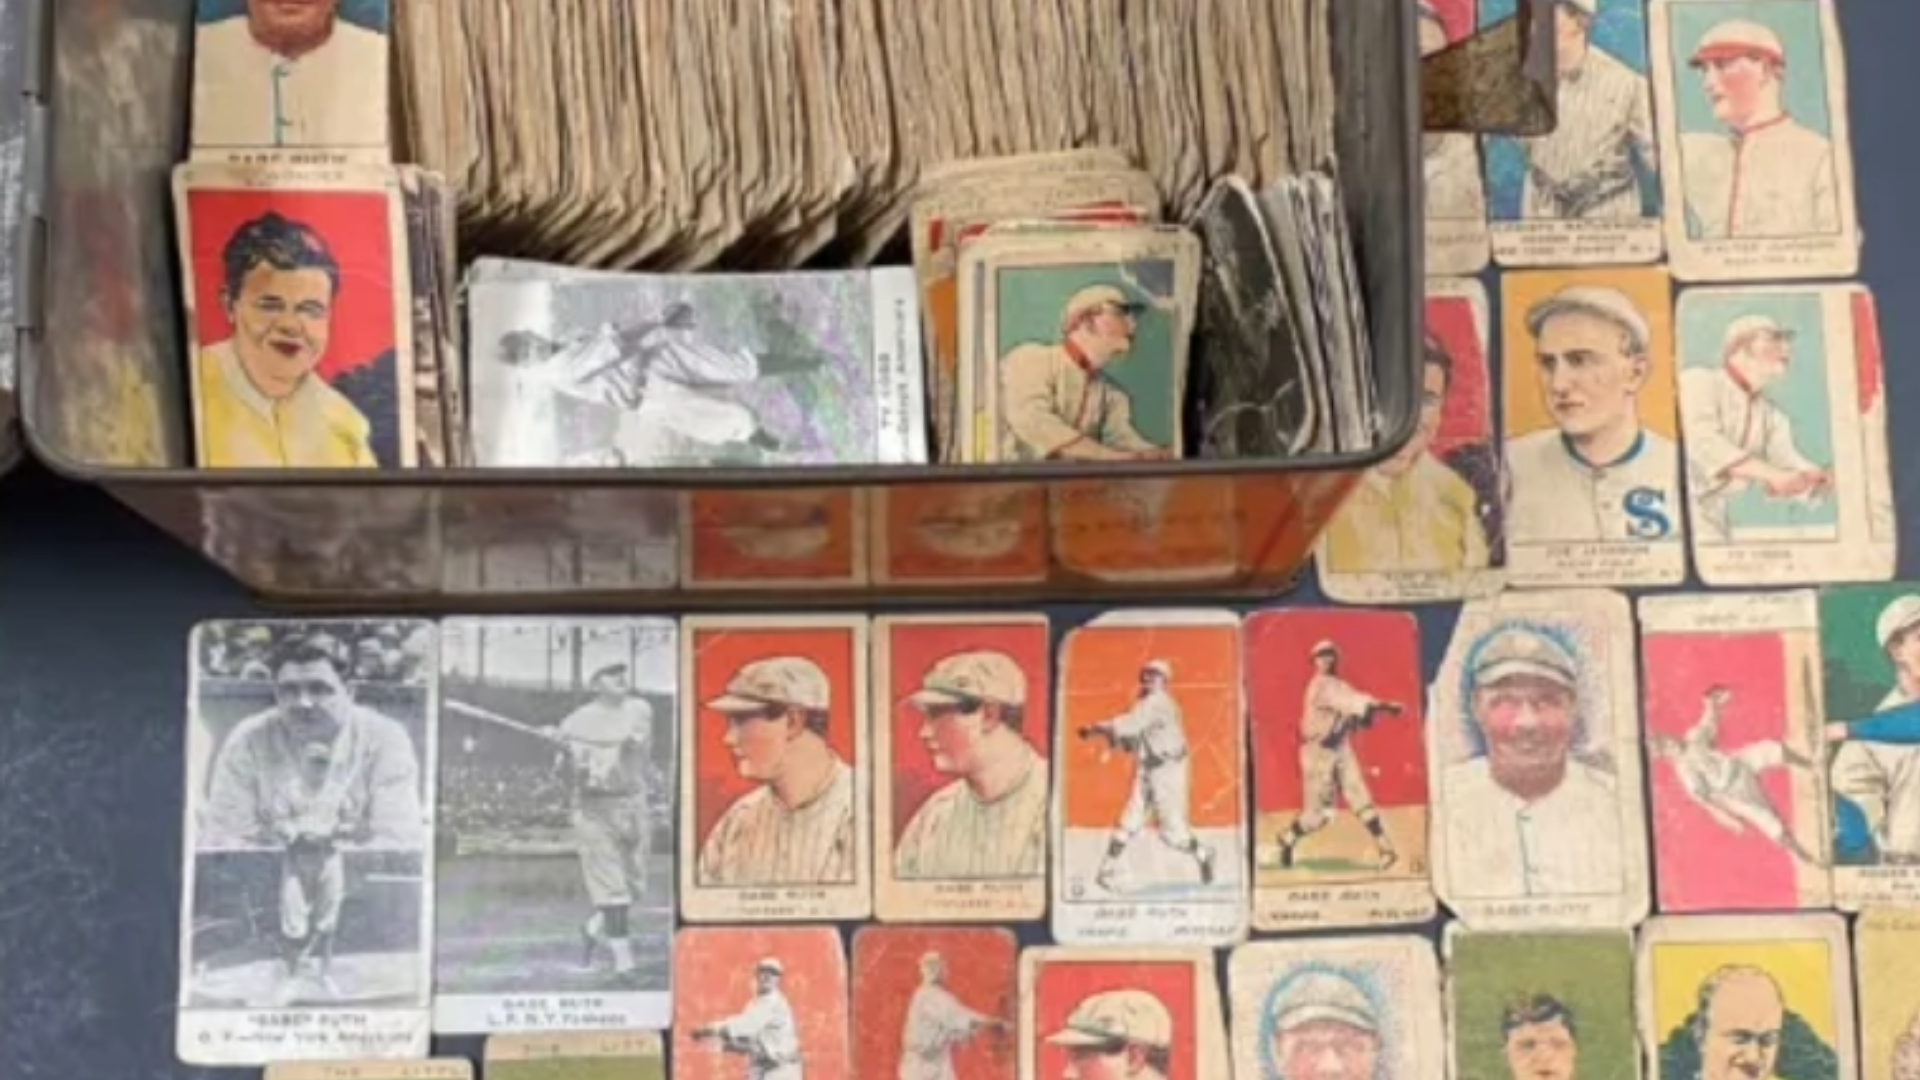 $12.6M Mickey Mantle Baseball Card Was Bought in 1991 for Just $50K